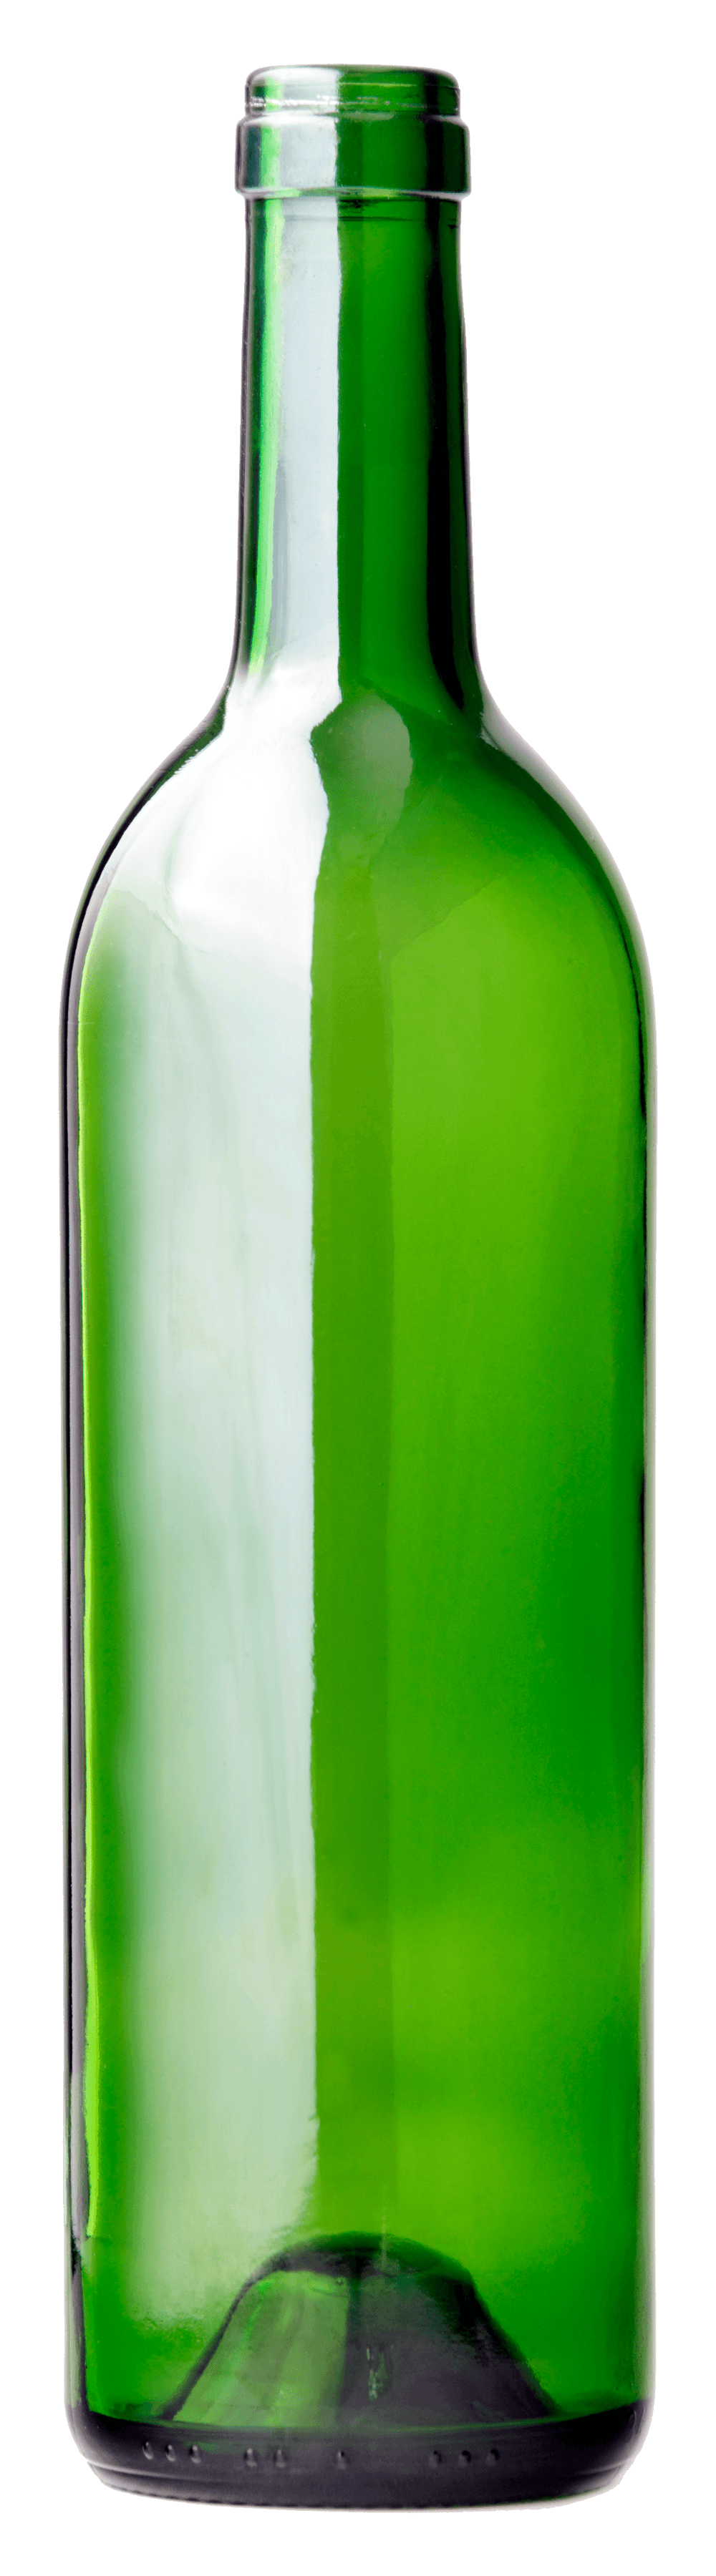 Glass Green Bottle Png Image PNG Image